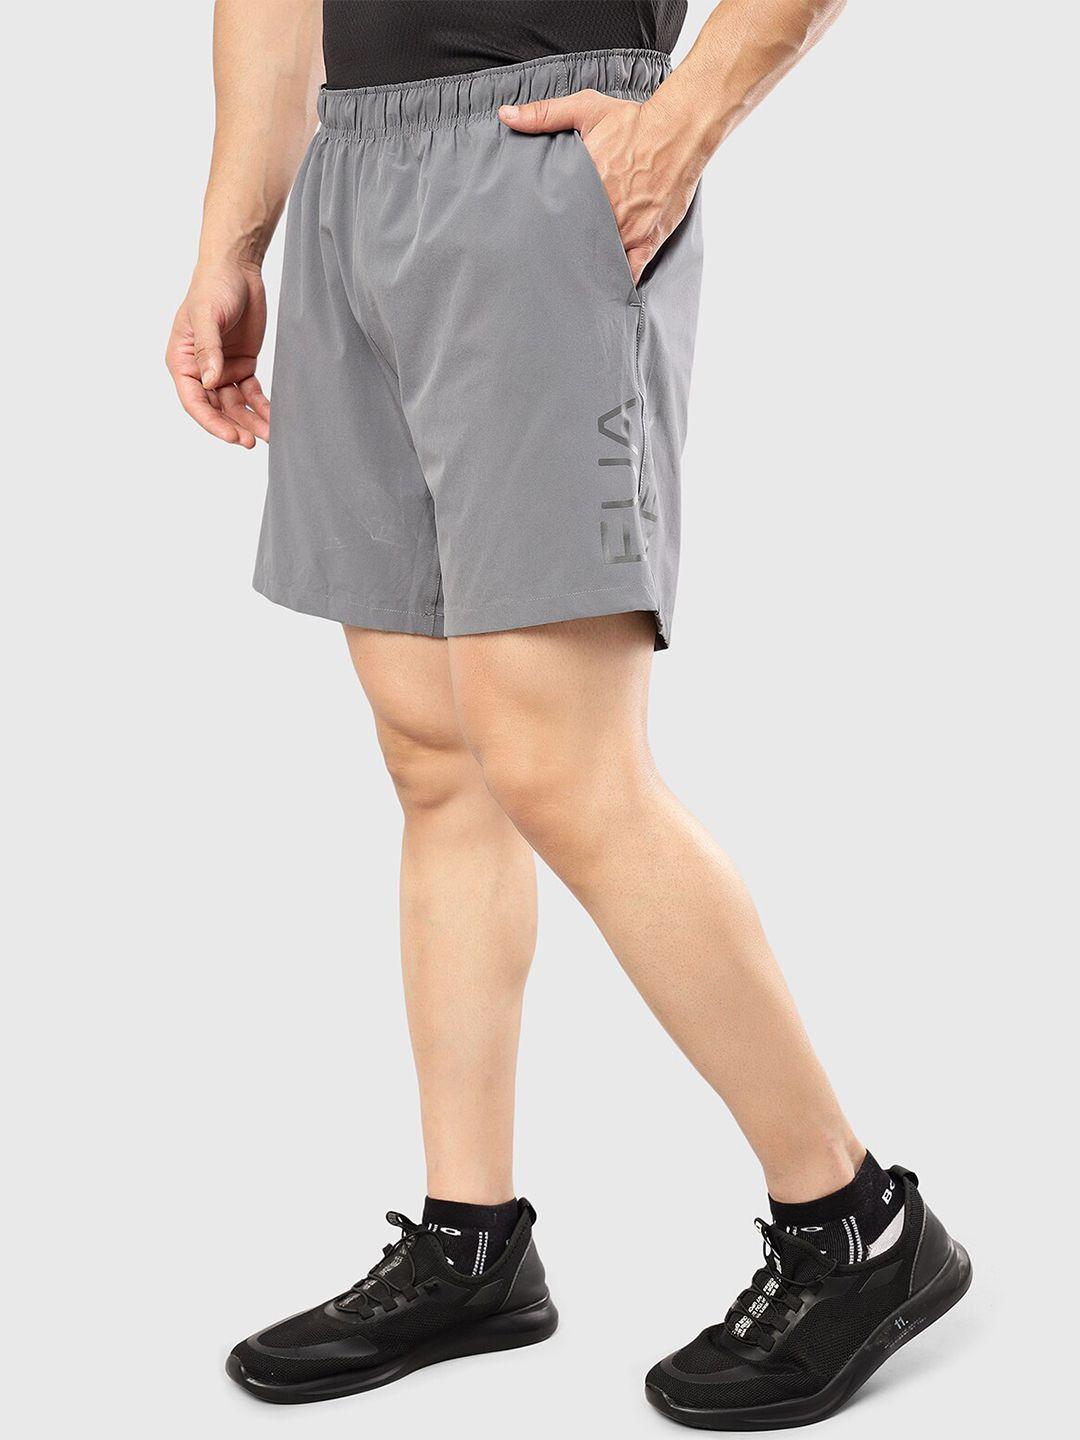 fuaark-mid-rise-above-knee-length-sports-shorts